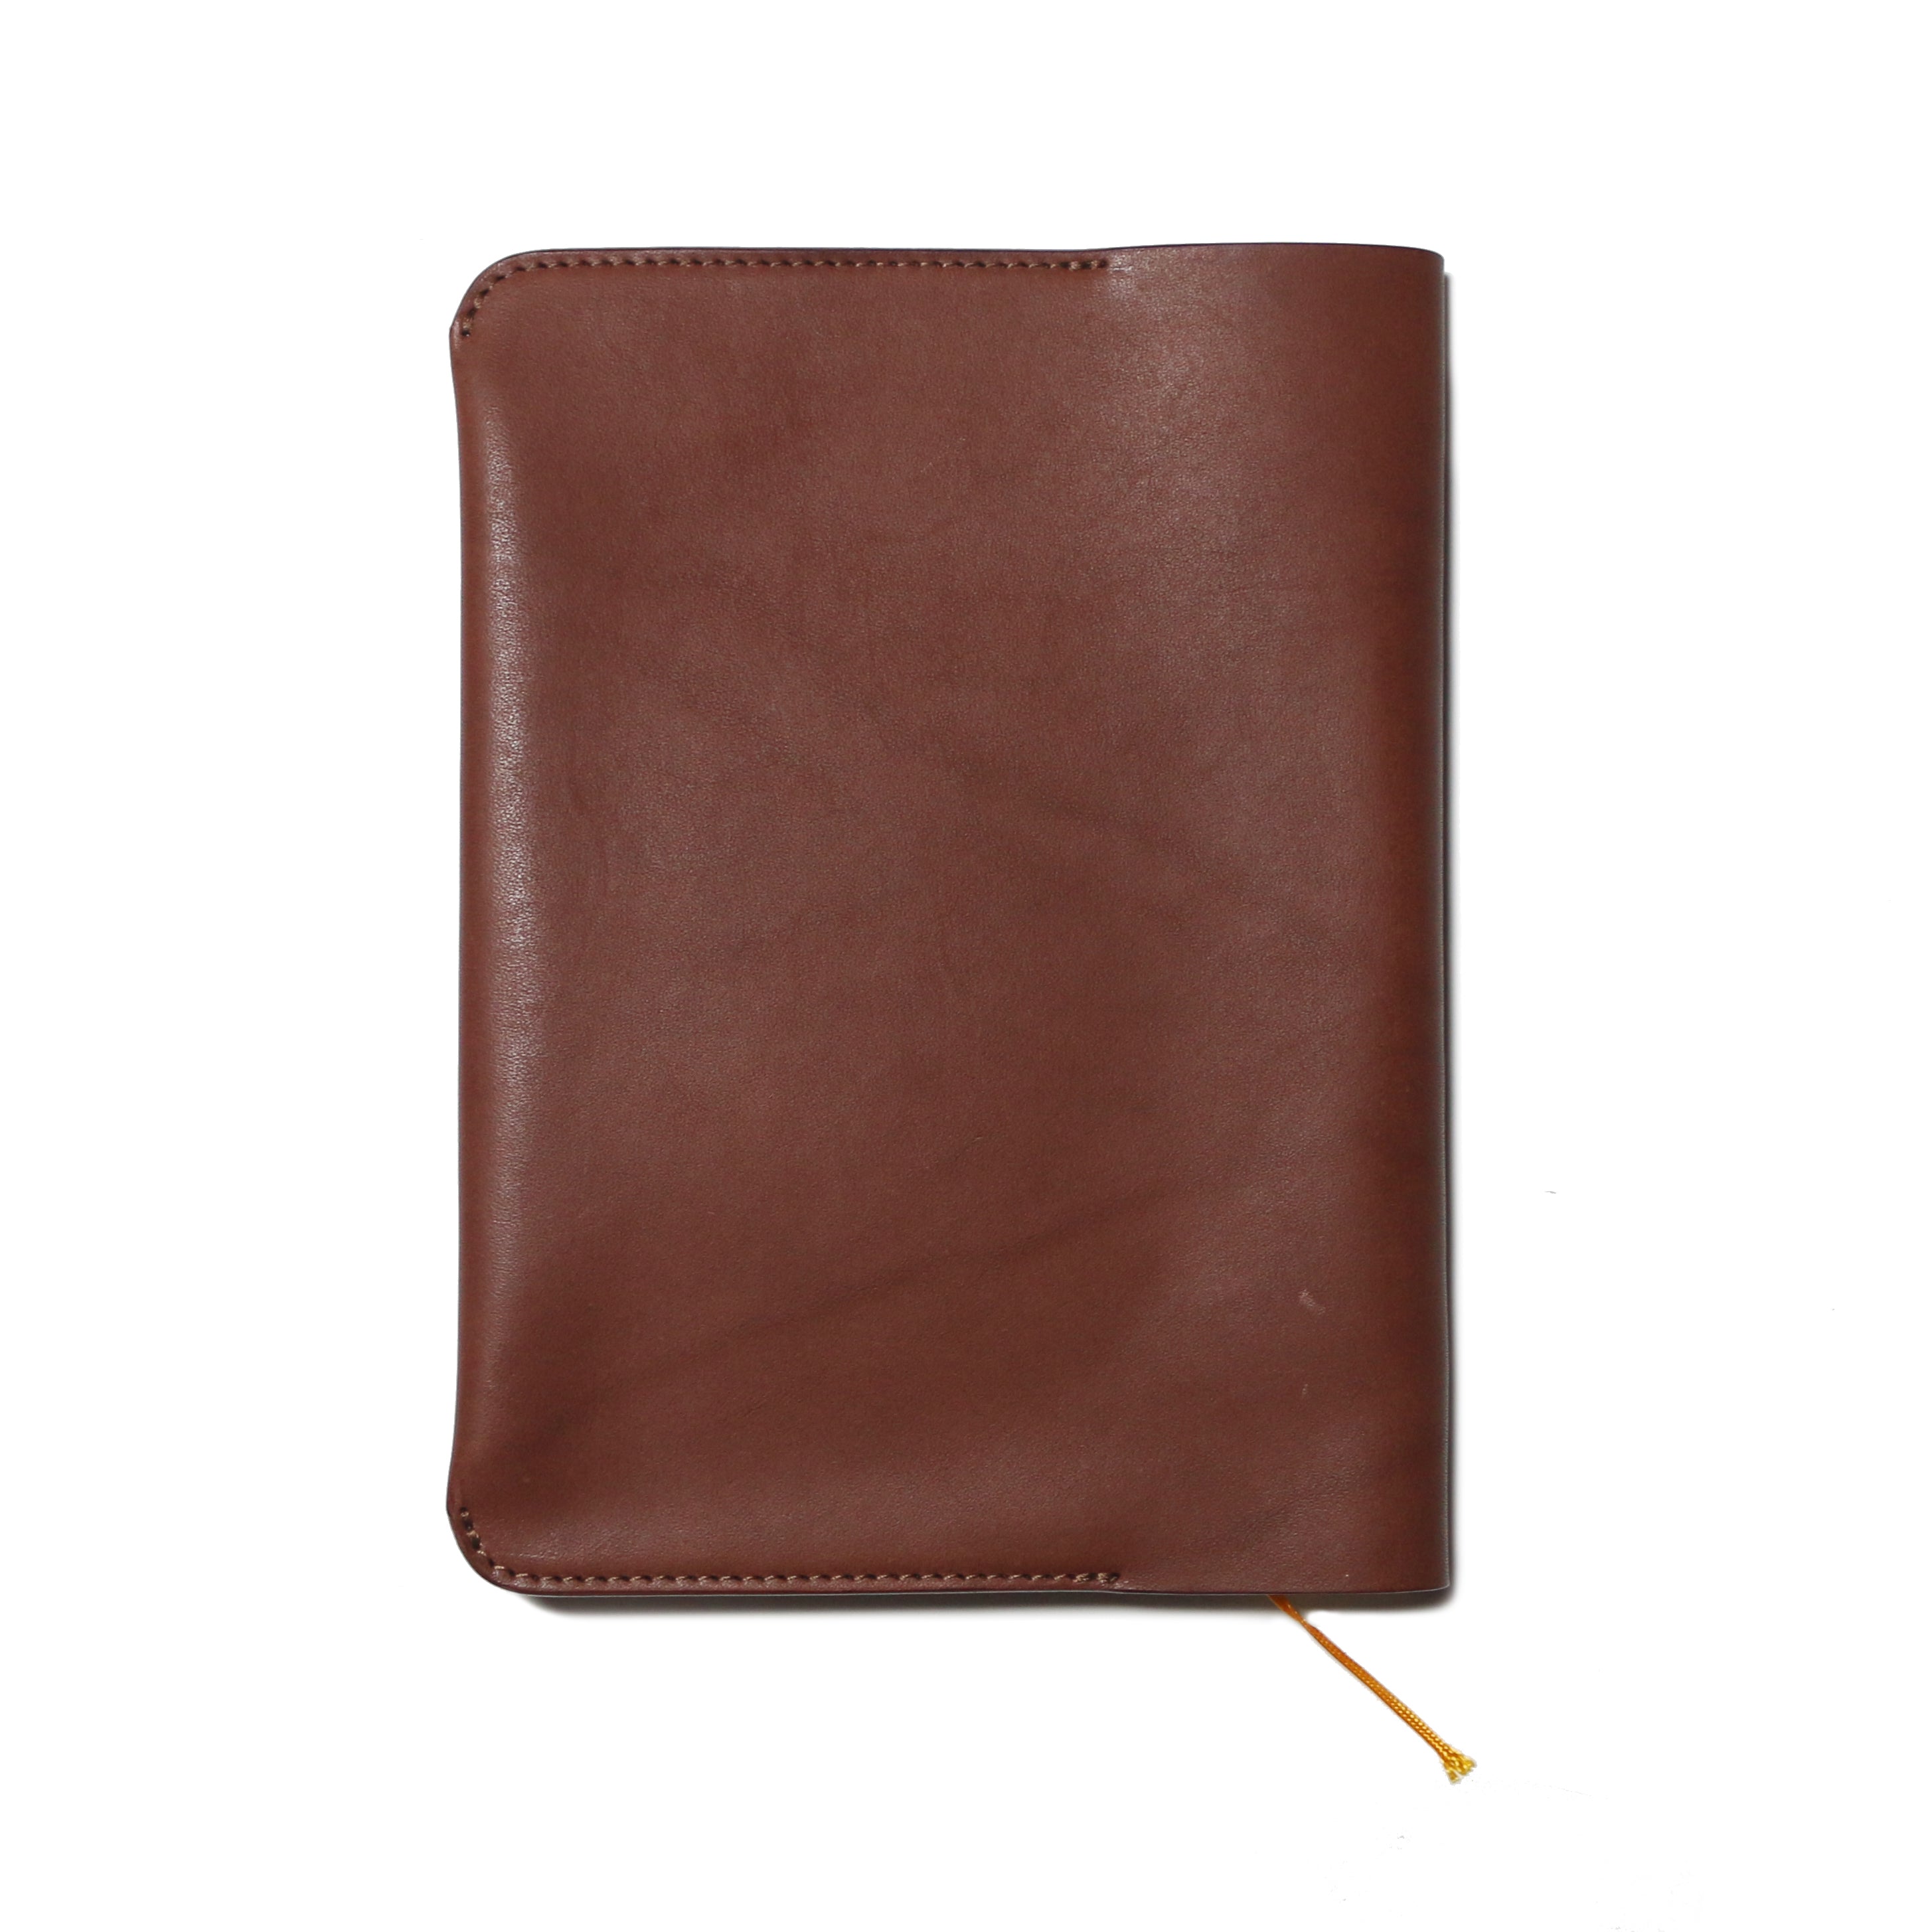 BG0025 A5size notebook cover